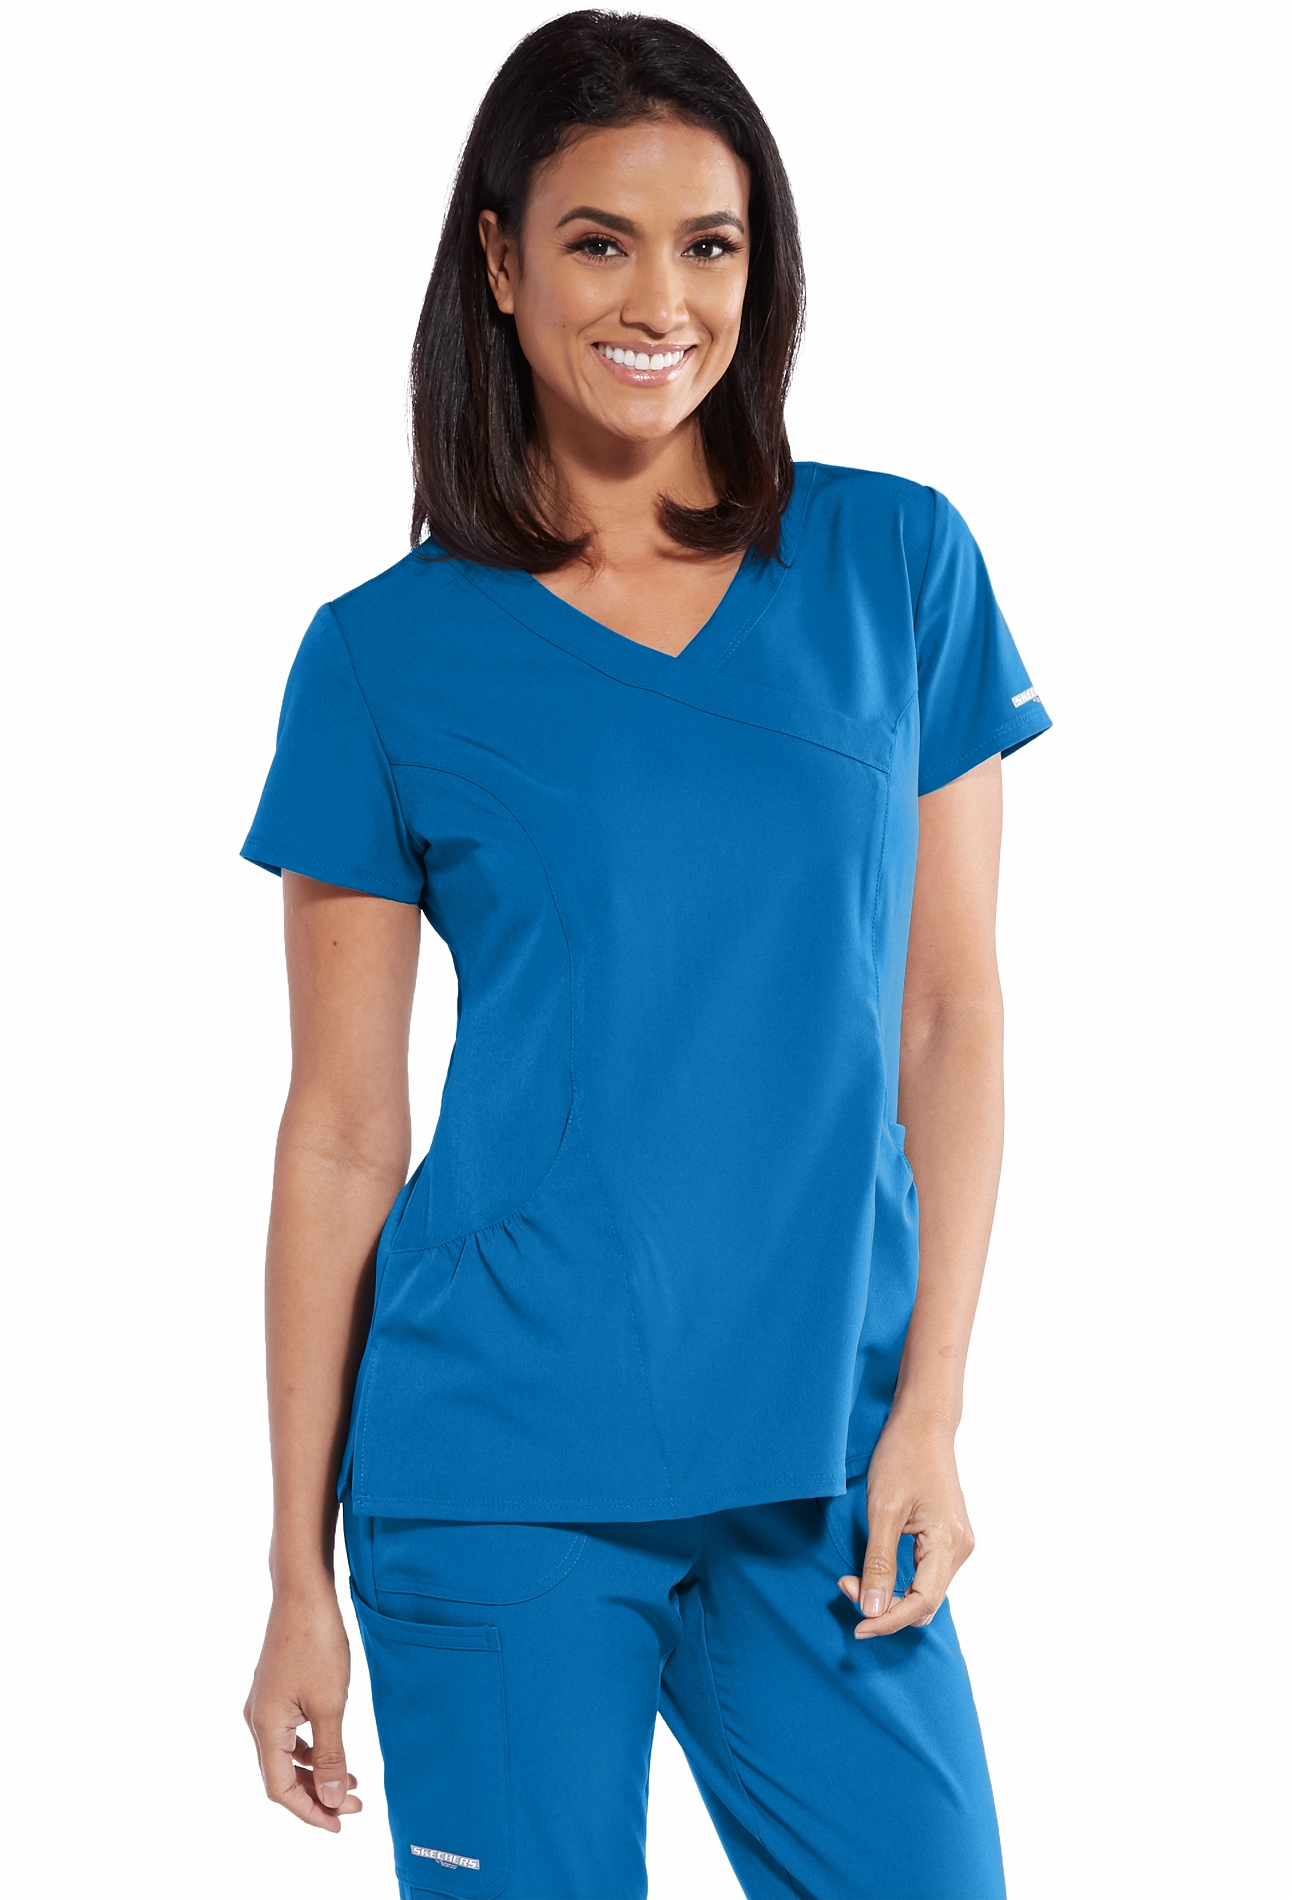 https://medicalscrubscollection.com/content/images/thumbs/0764215_skechers-by-barco-womens-surplice-mock-wrap-scrub-top-skt064.jpeg